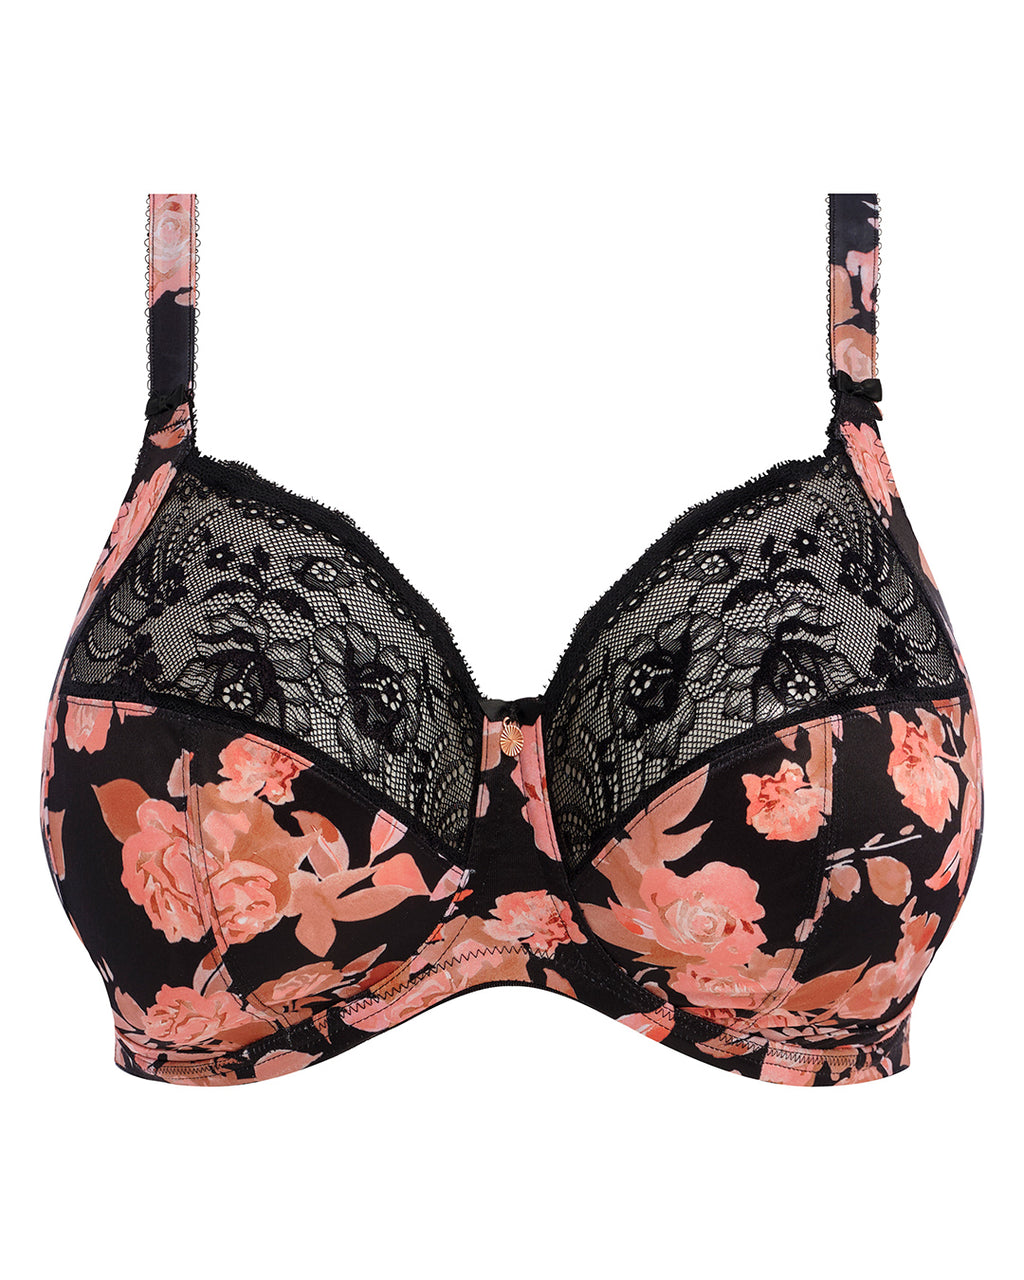 BRAS - SHOP ALL – Specialty Fittings Lingerie